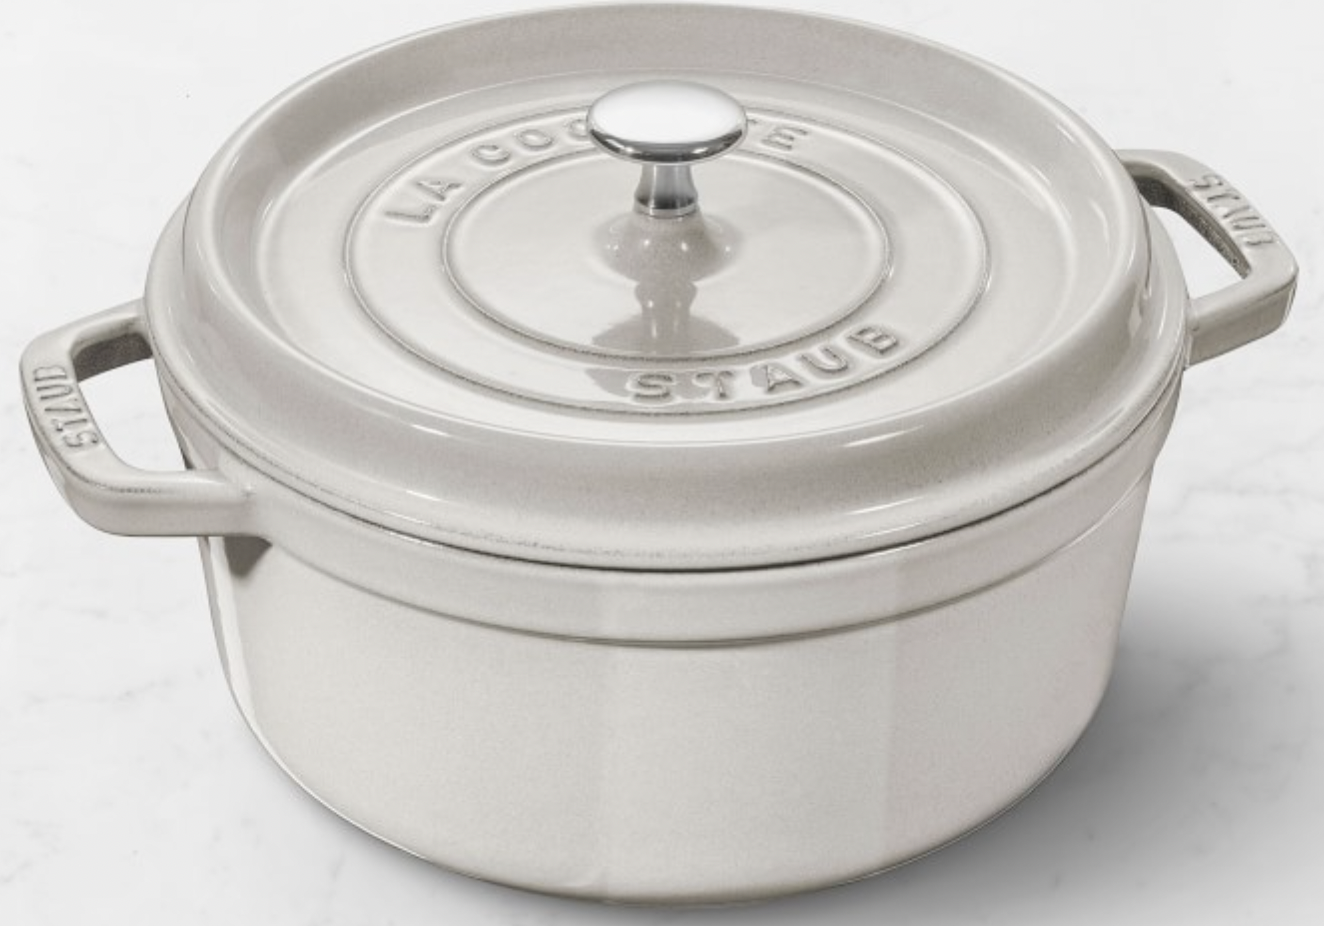 STAUB deals : on SALE for black friday! — FIVE MARYS RANCH